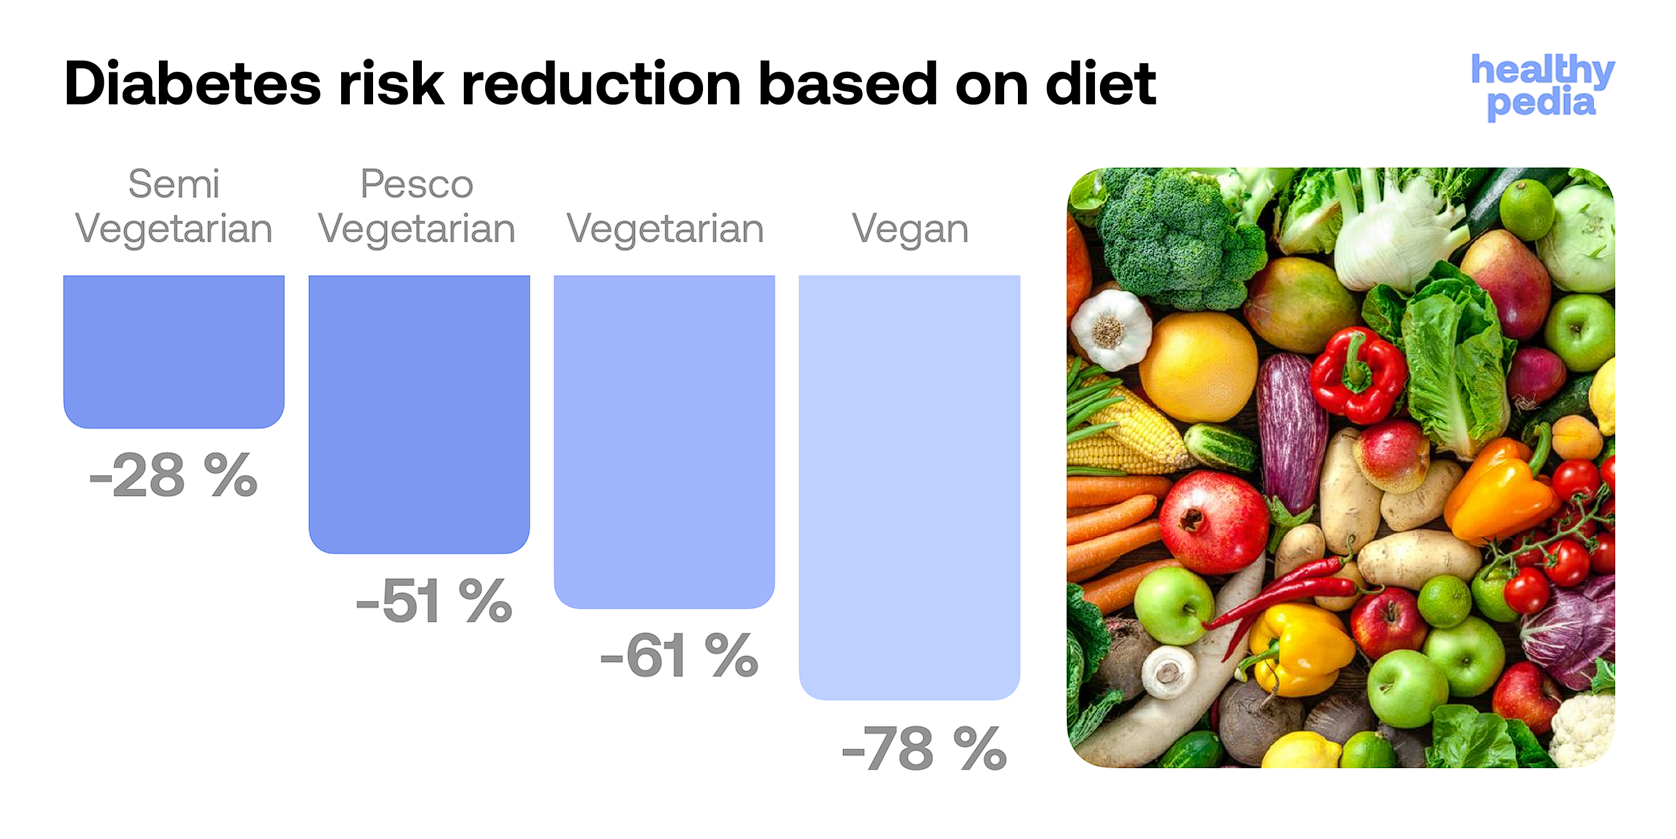 Diabetes risk reduction based on diet, stats